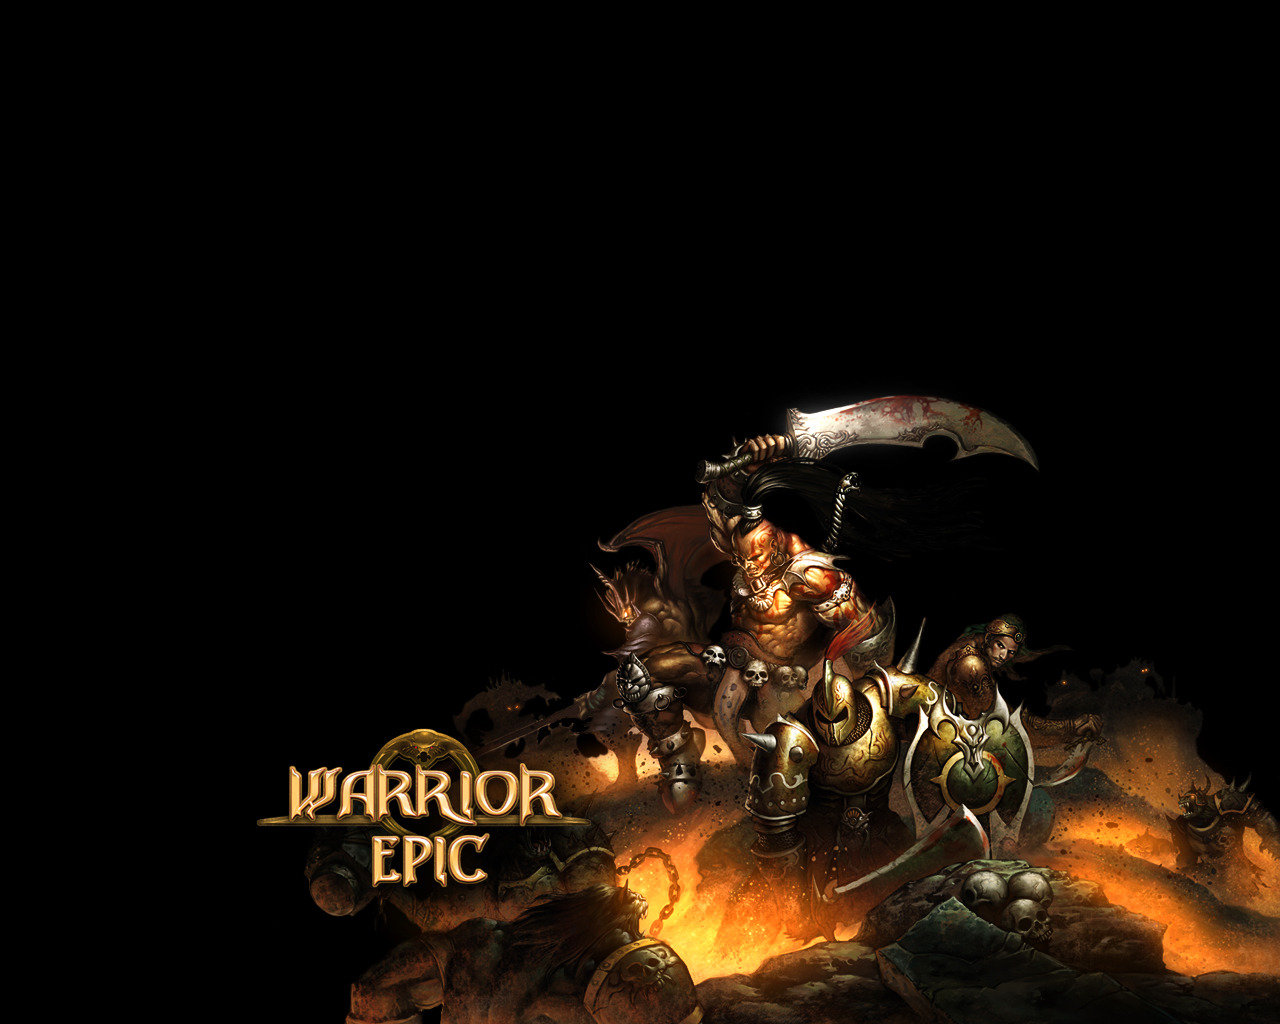 Download hd 1280x1024 Warrior Epic desktop background ID:25080 for free